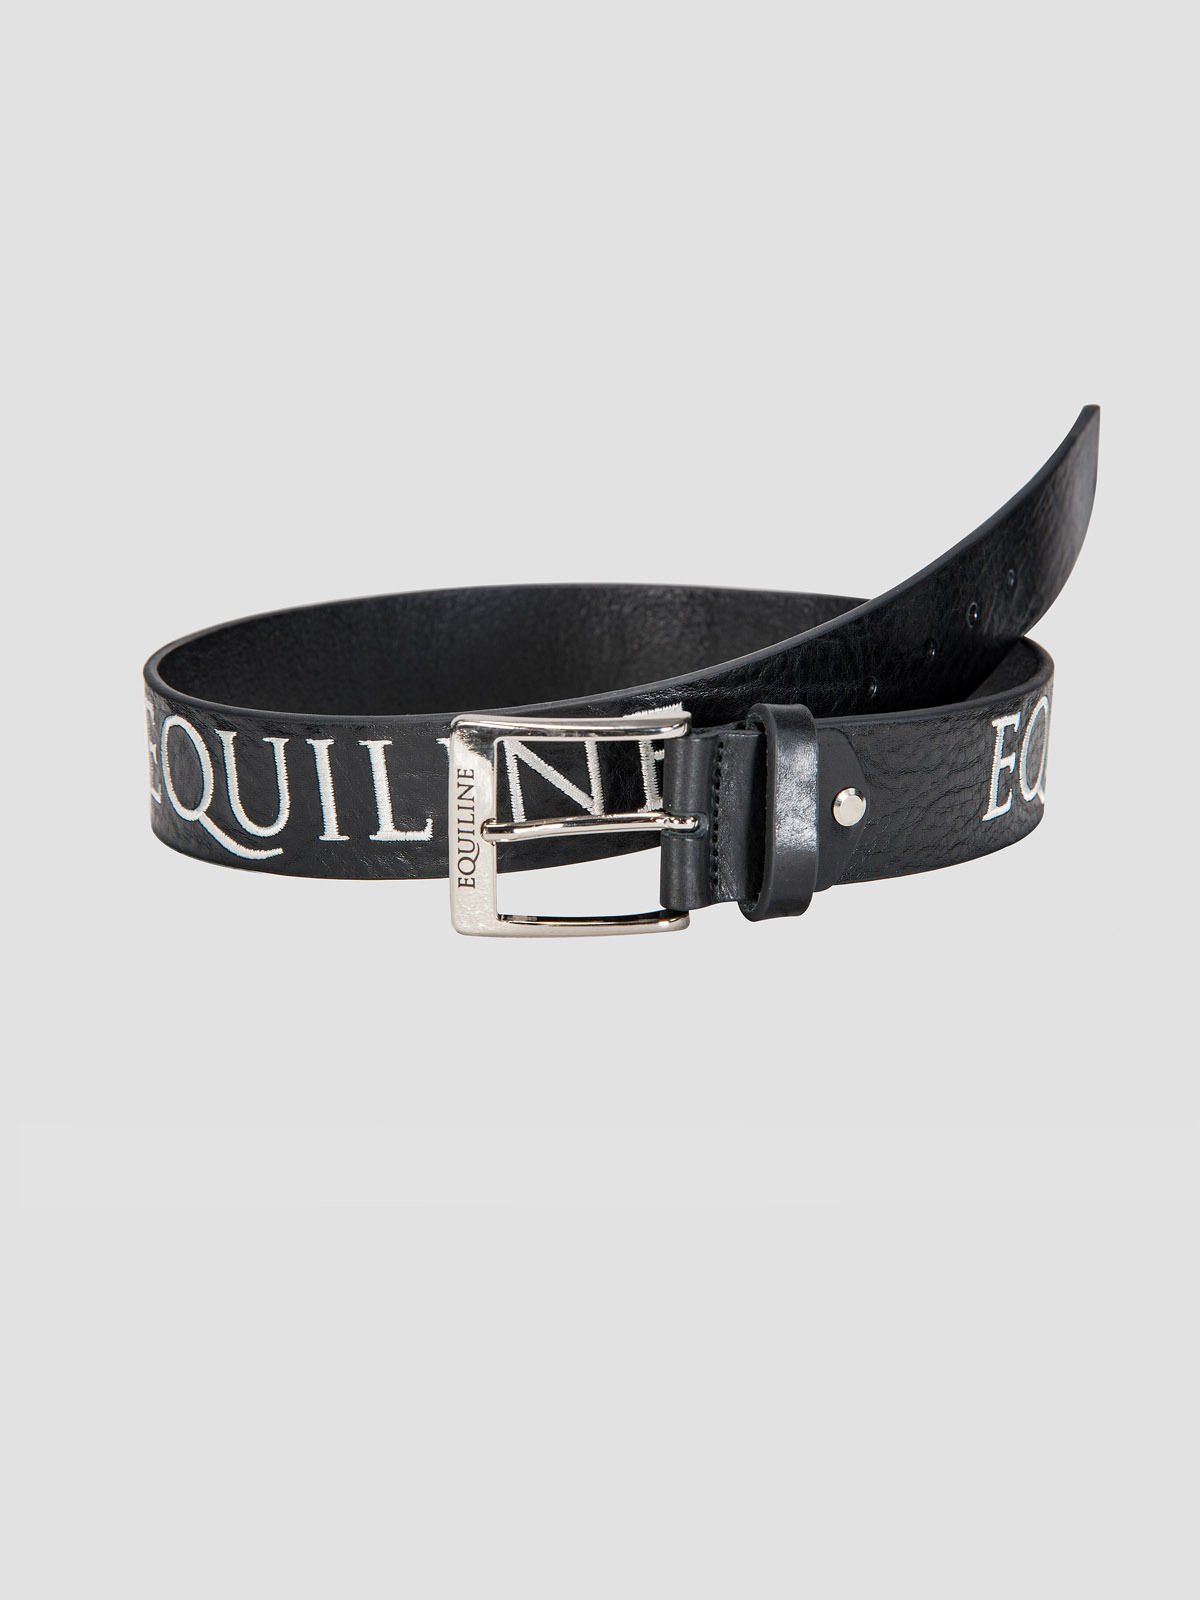 Equiline Ralph unisex leather belt with Italian flag embroidery in black